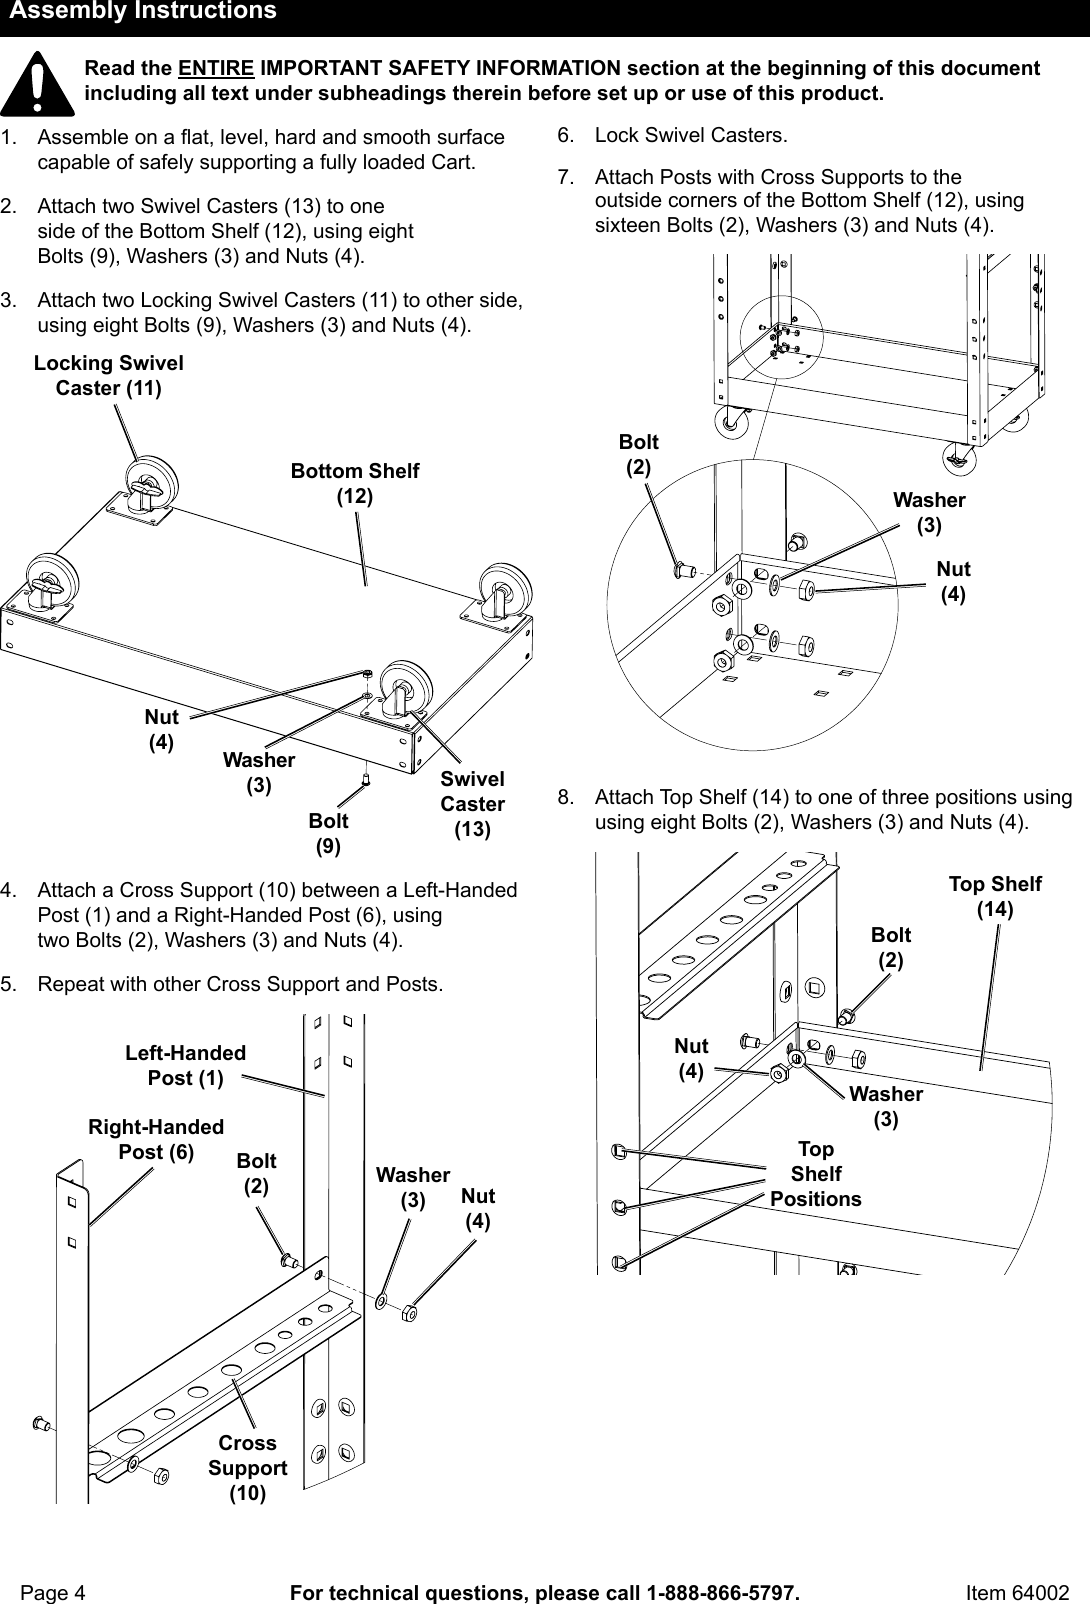 Page 4 of 8 - Manual For The 64002 26 In. Large 1 Drawer Black Tool Cart With Locking